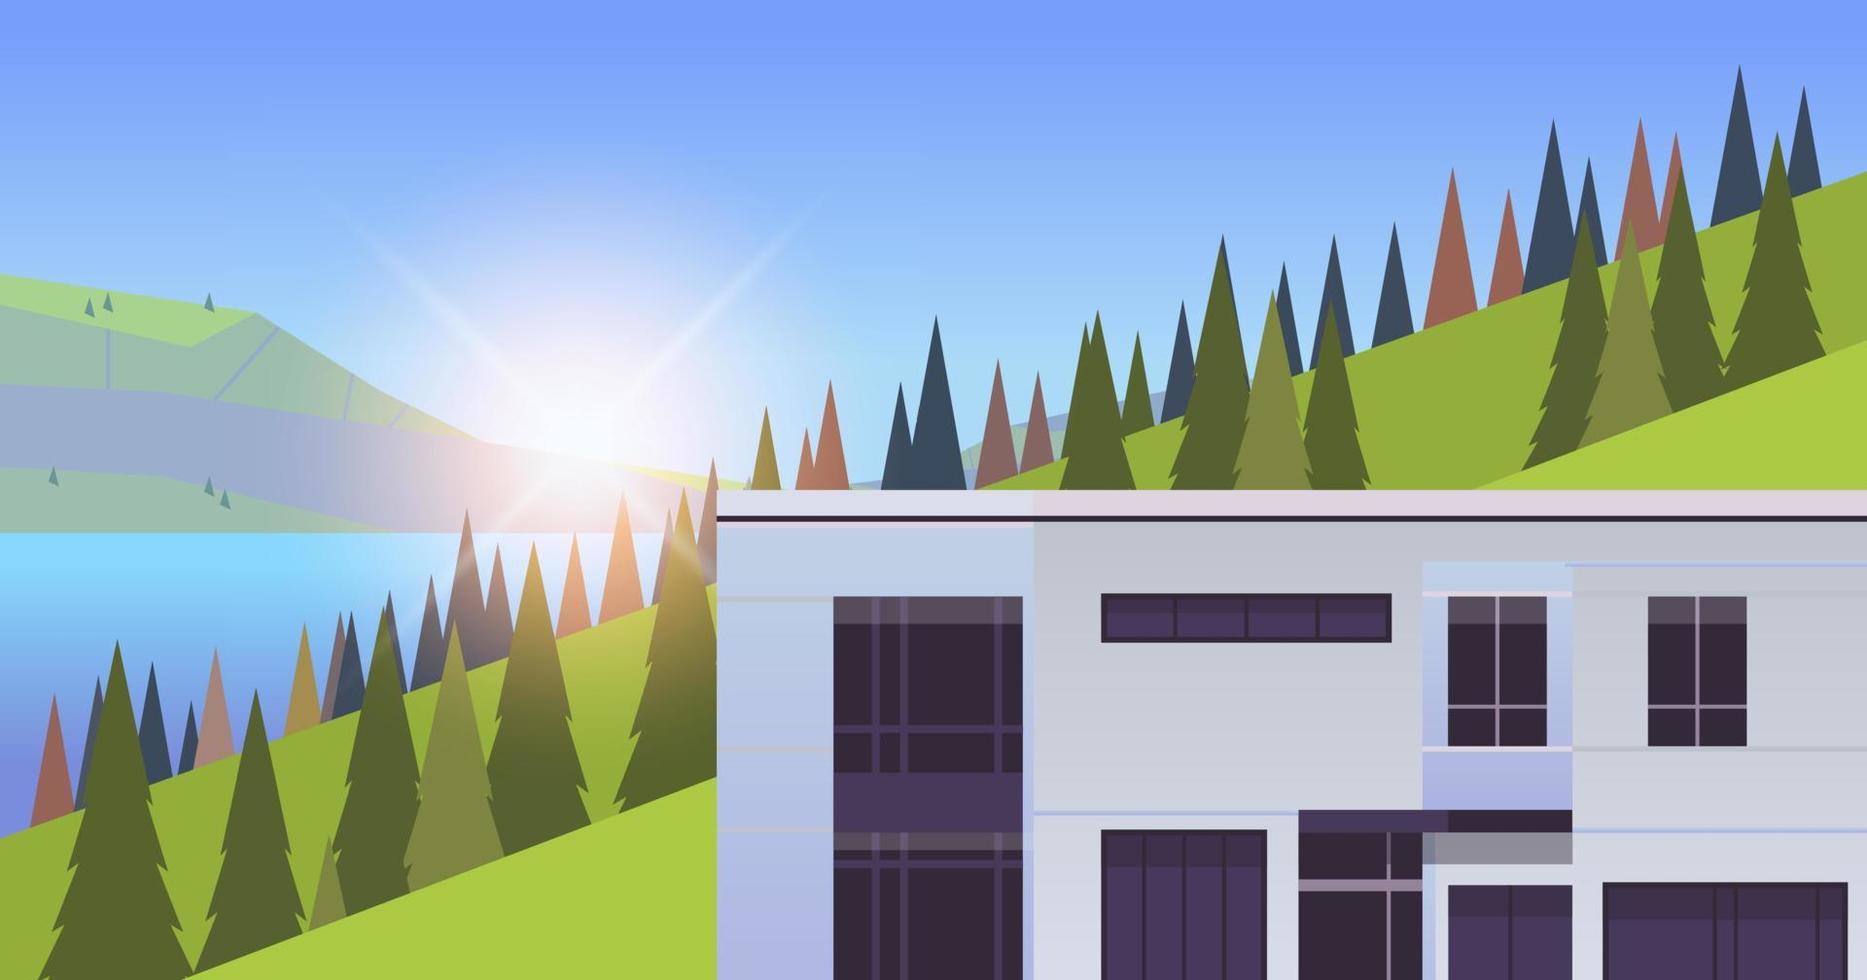 Mountains residential houses area and summer season landscape concept flat vector illustration.